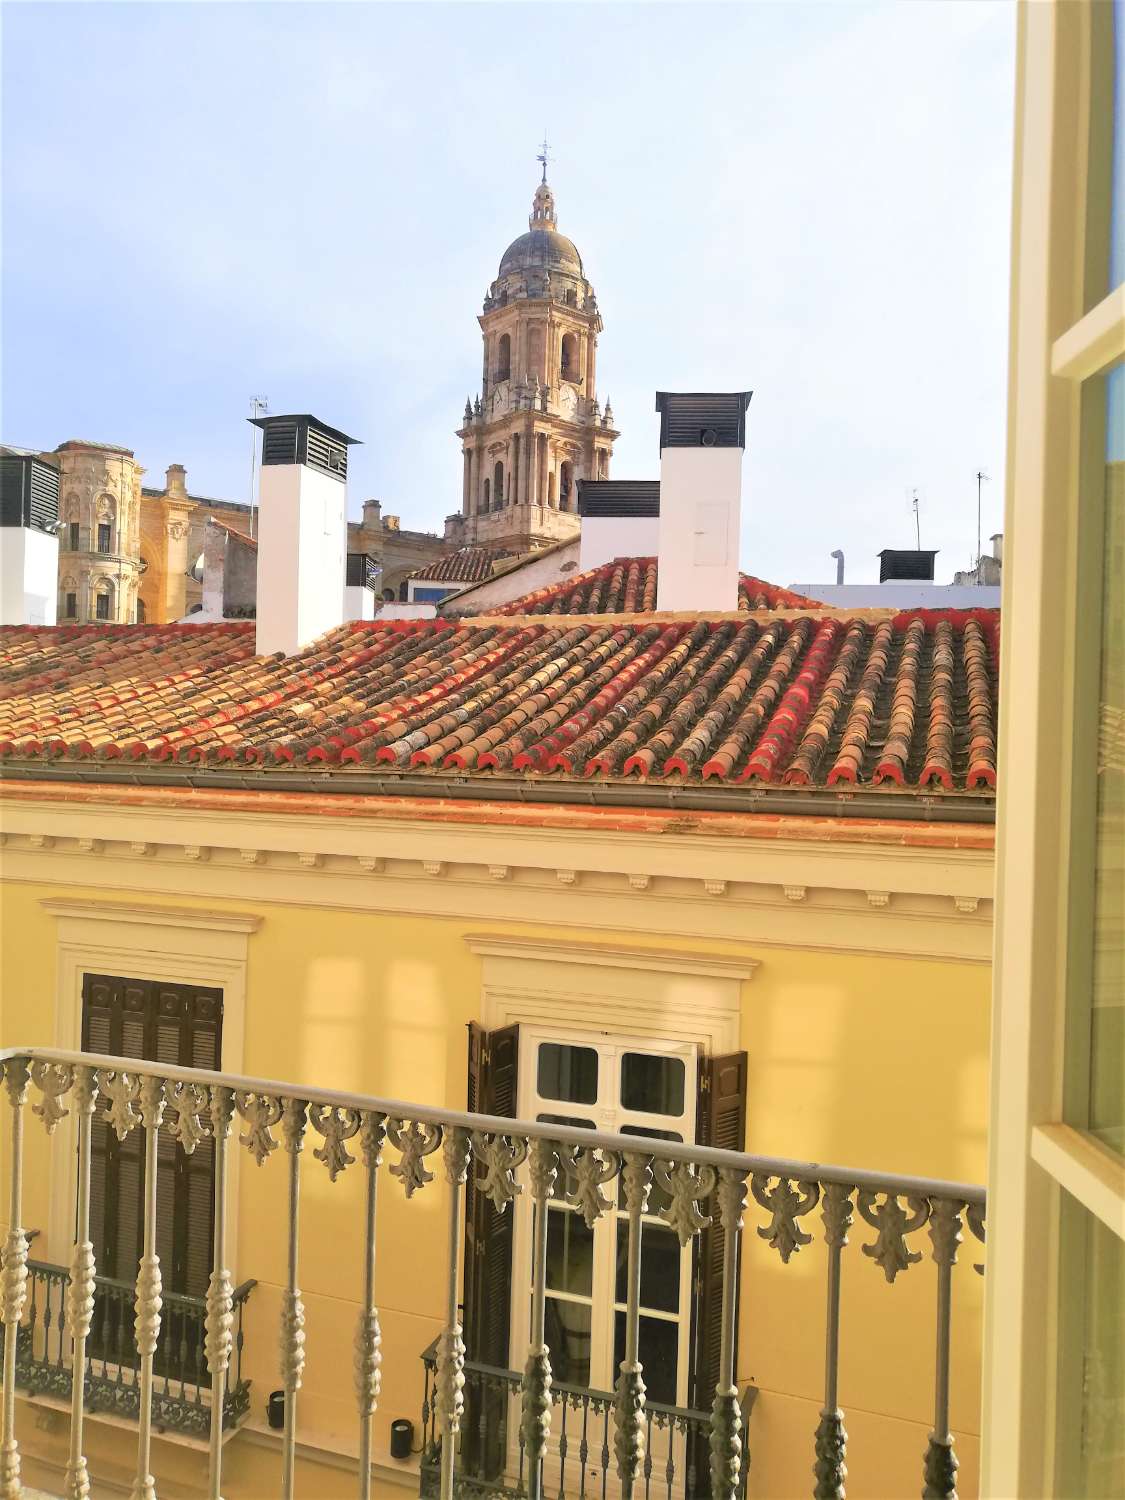 SOLD! LUXURY APARTMENT RECENTLY RENOVATED, IN FRONT OF THE CATHEDRAL AND ALCAZABA. Terrace.